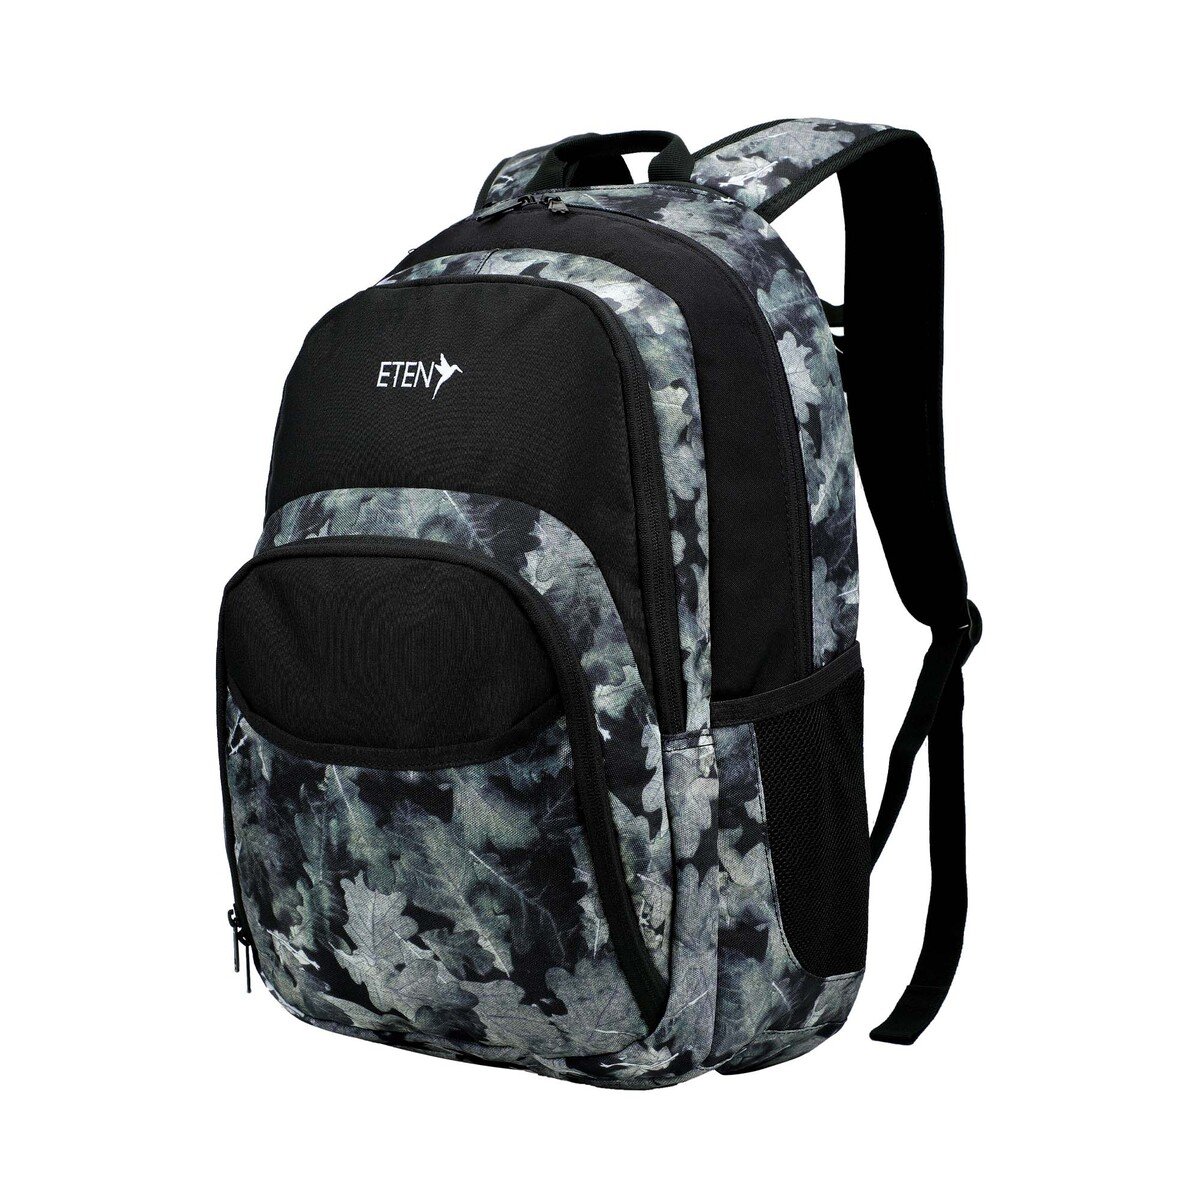 Eten Printed Backpack Assorted Design KB18305 18.5 inches